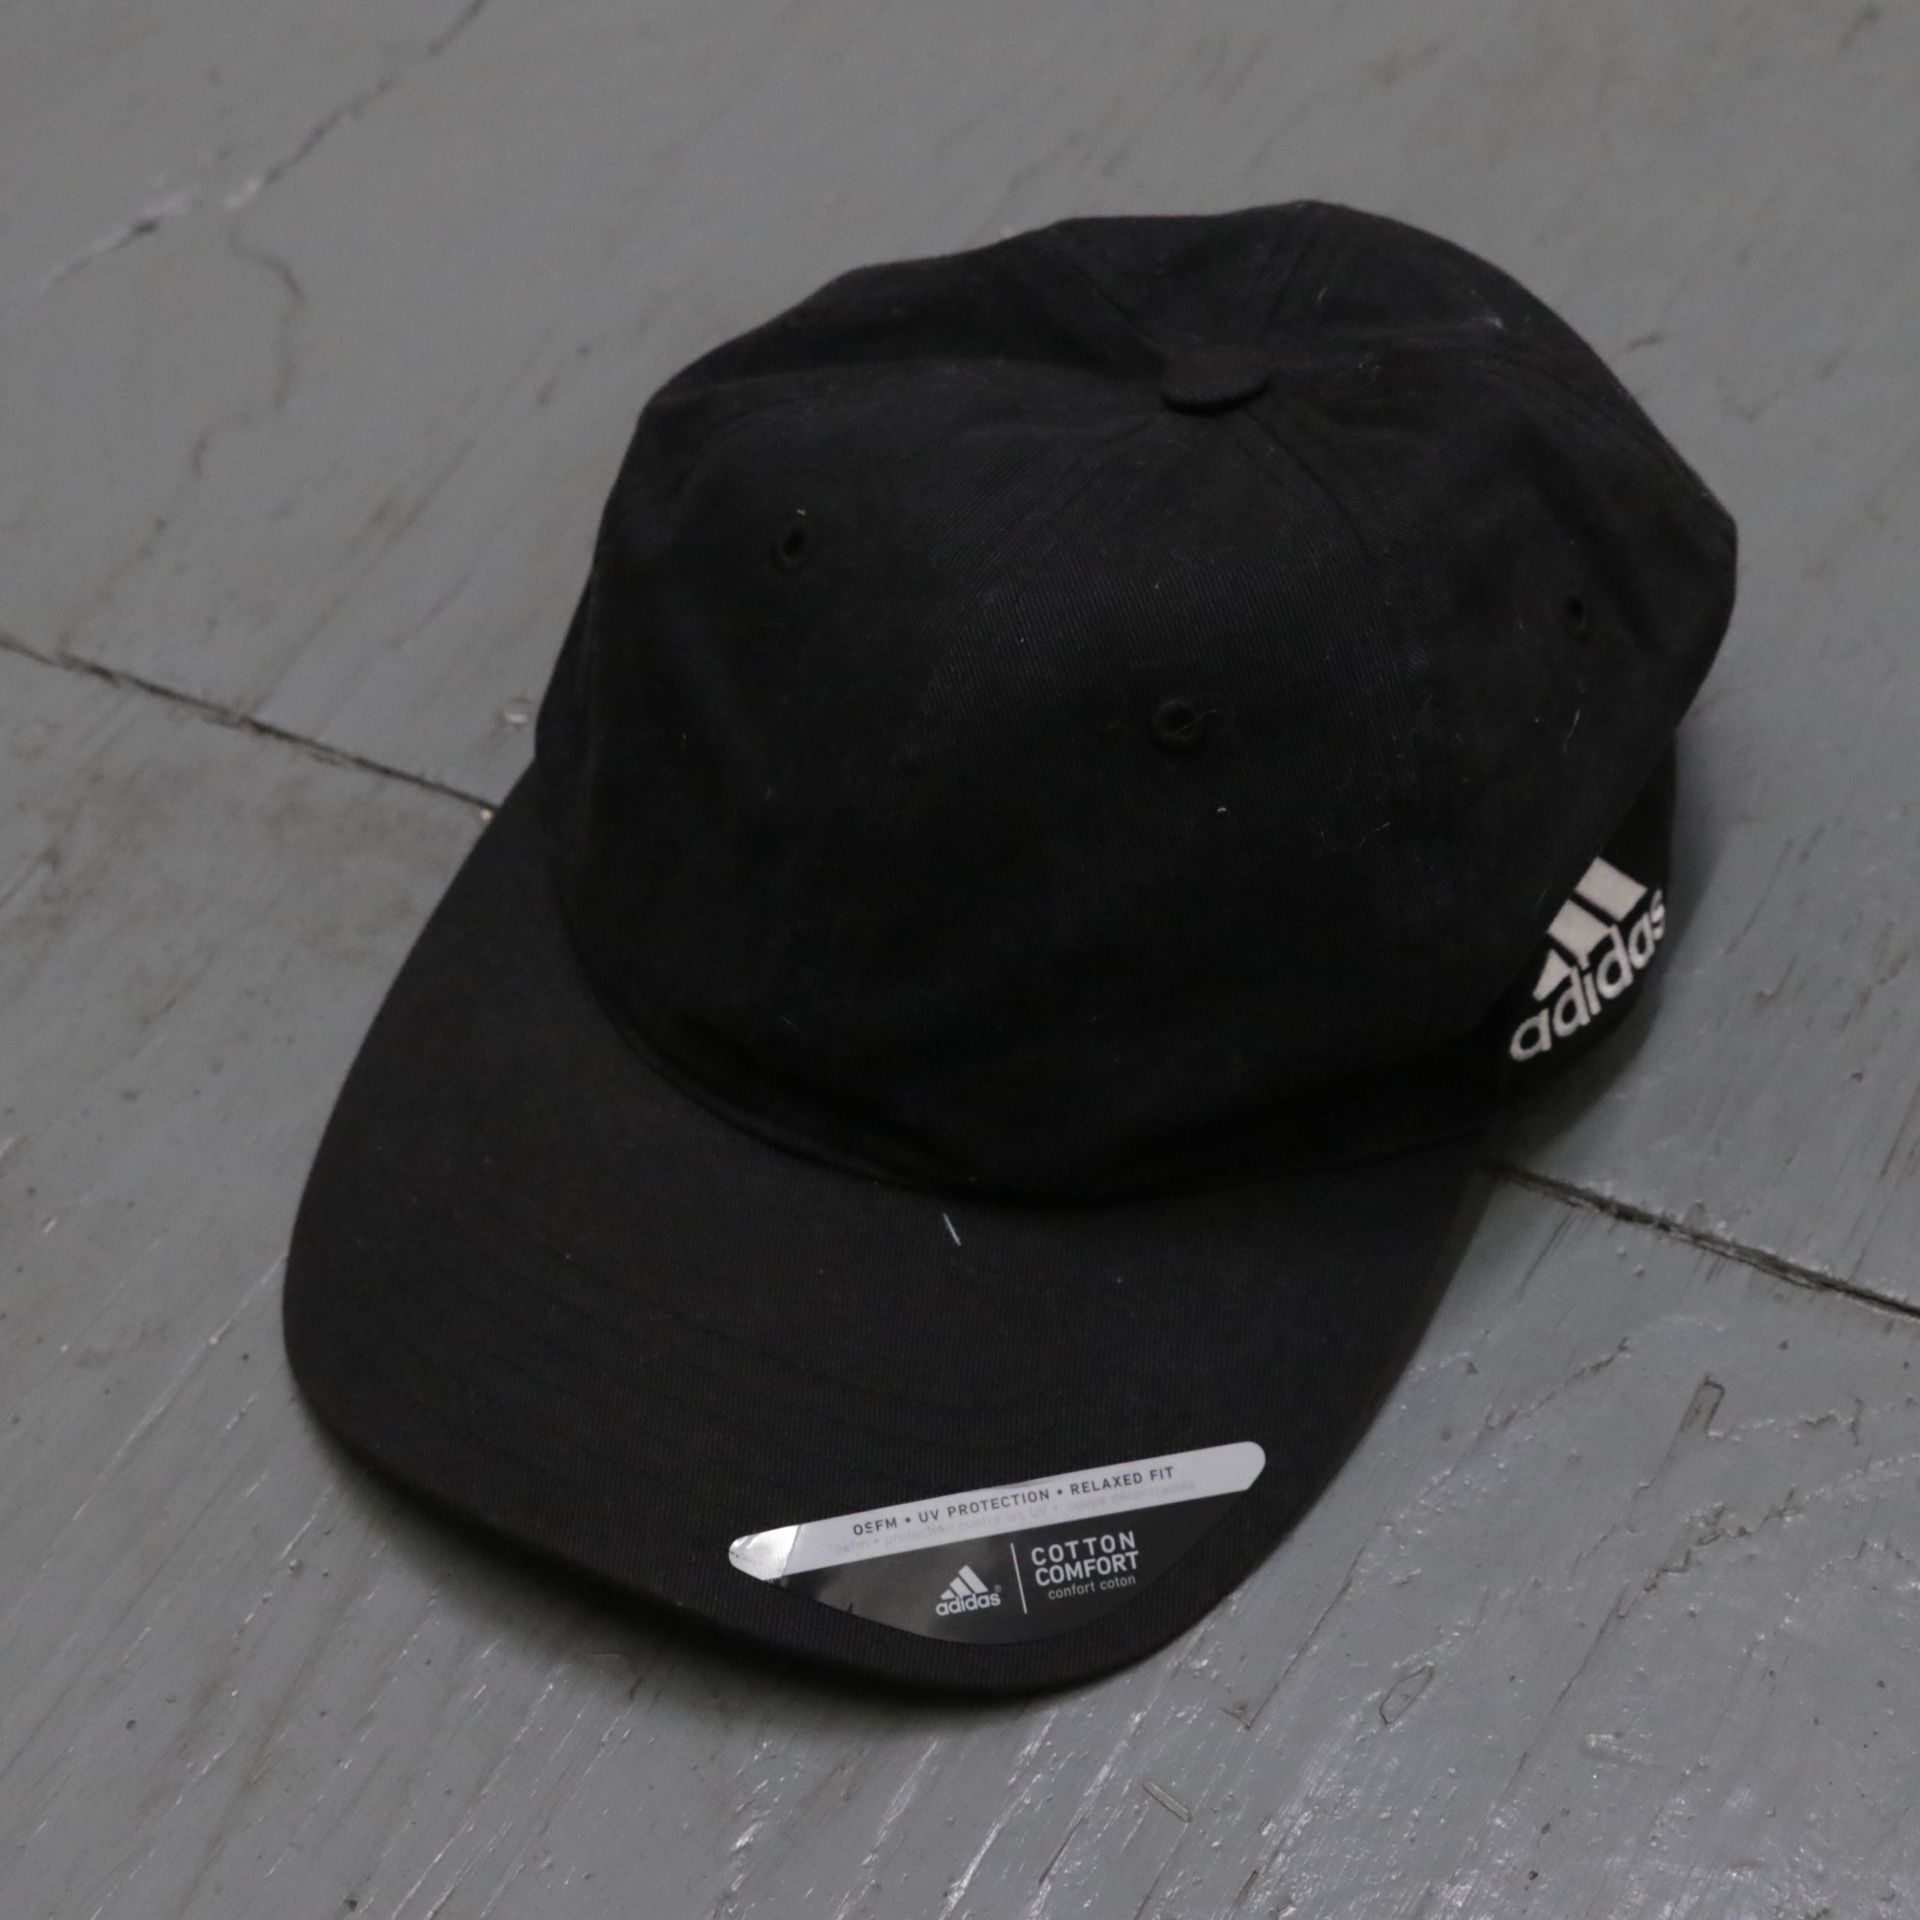 Adidas hat New With Tags